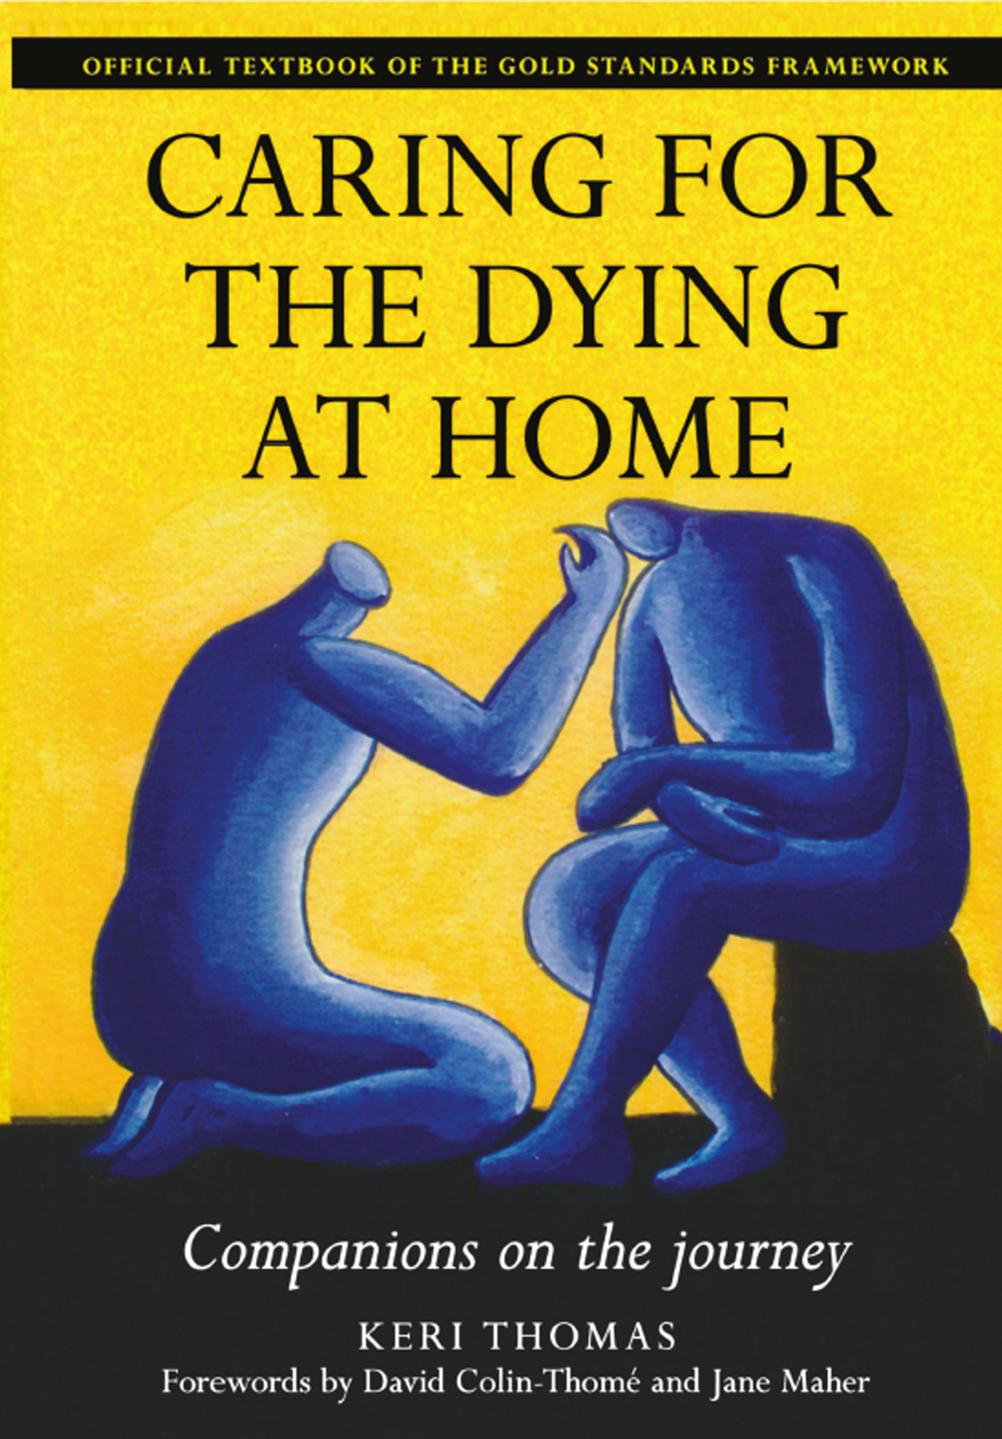 Caring for the dying at home : companions on the journey